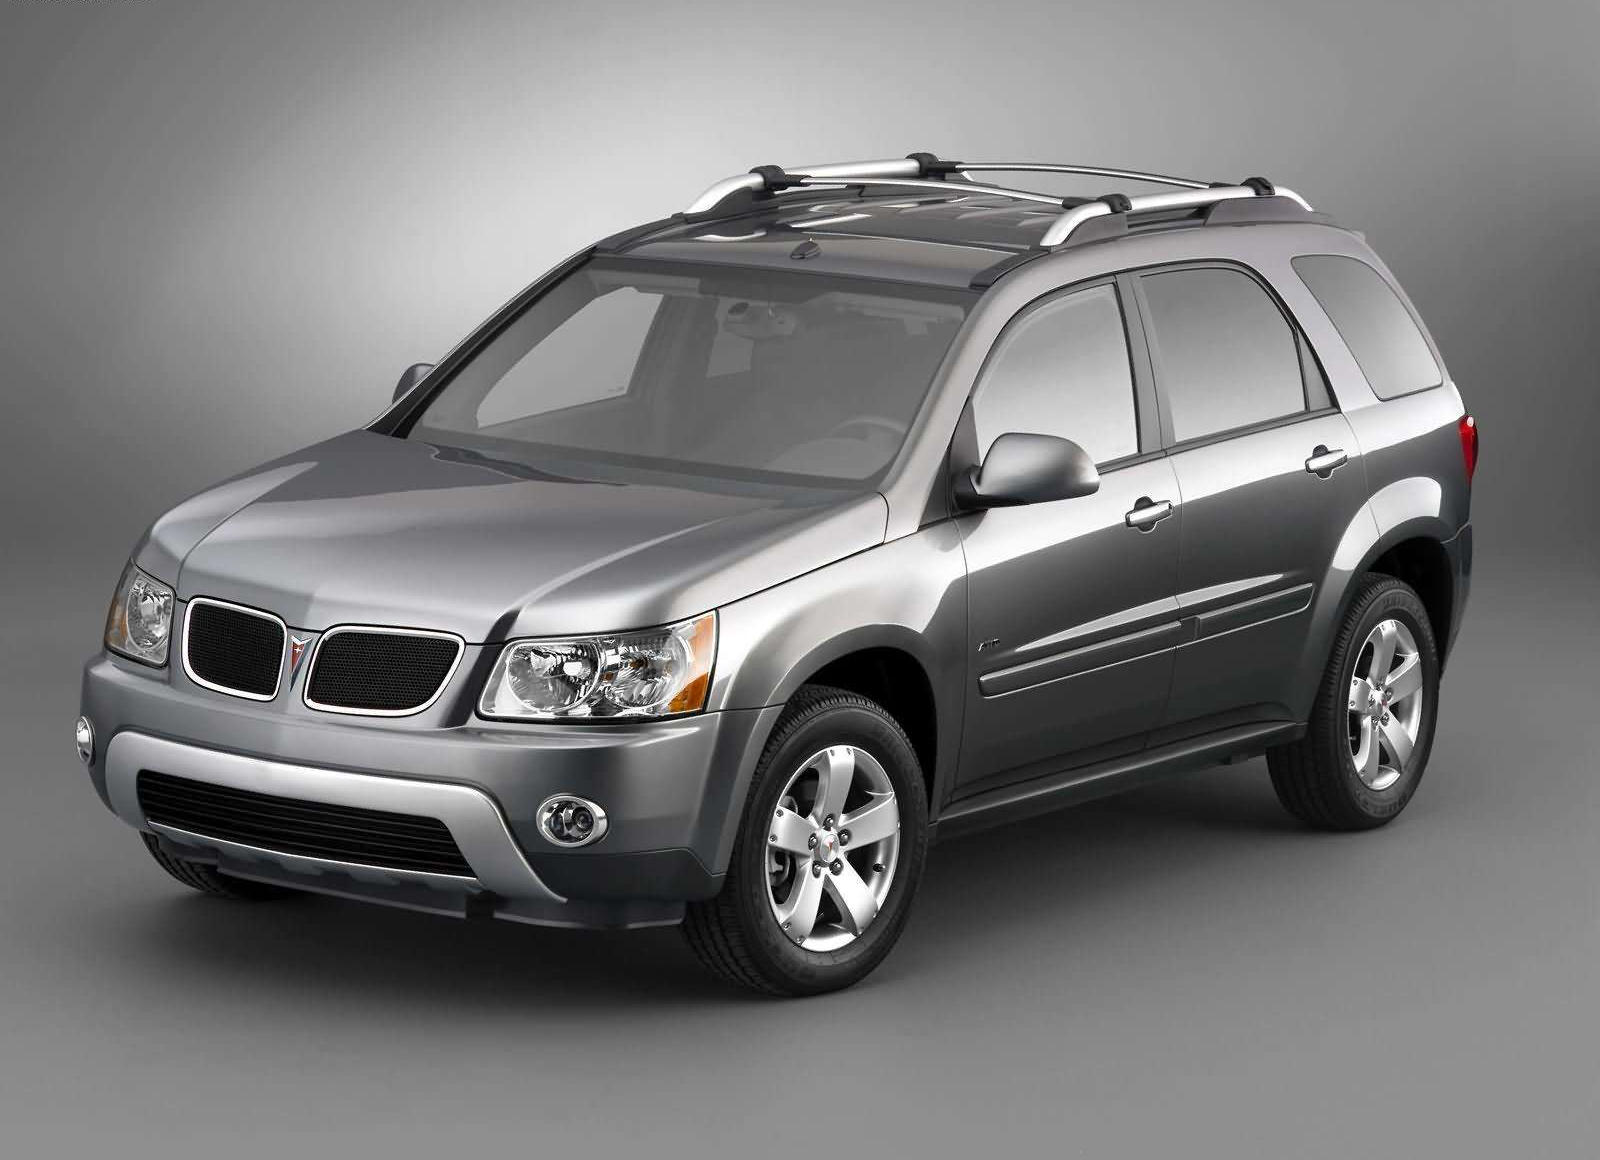 2008 Pontiac Torrent Front Angle View